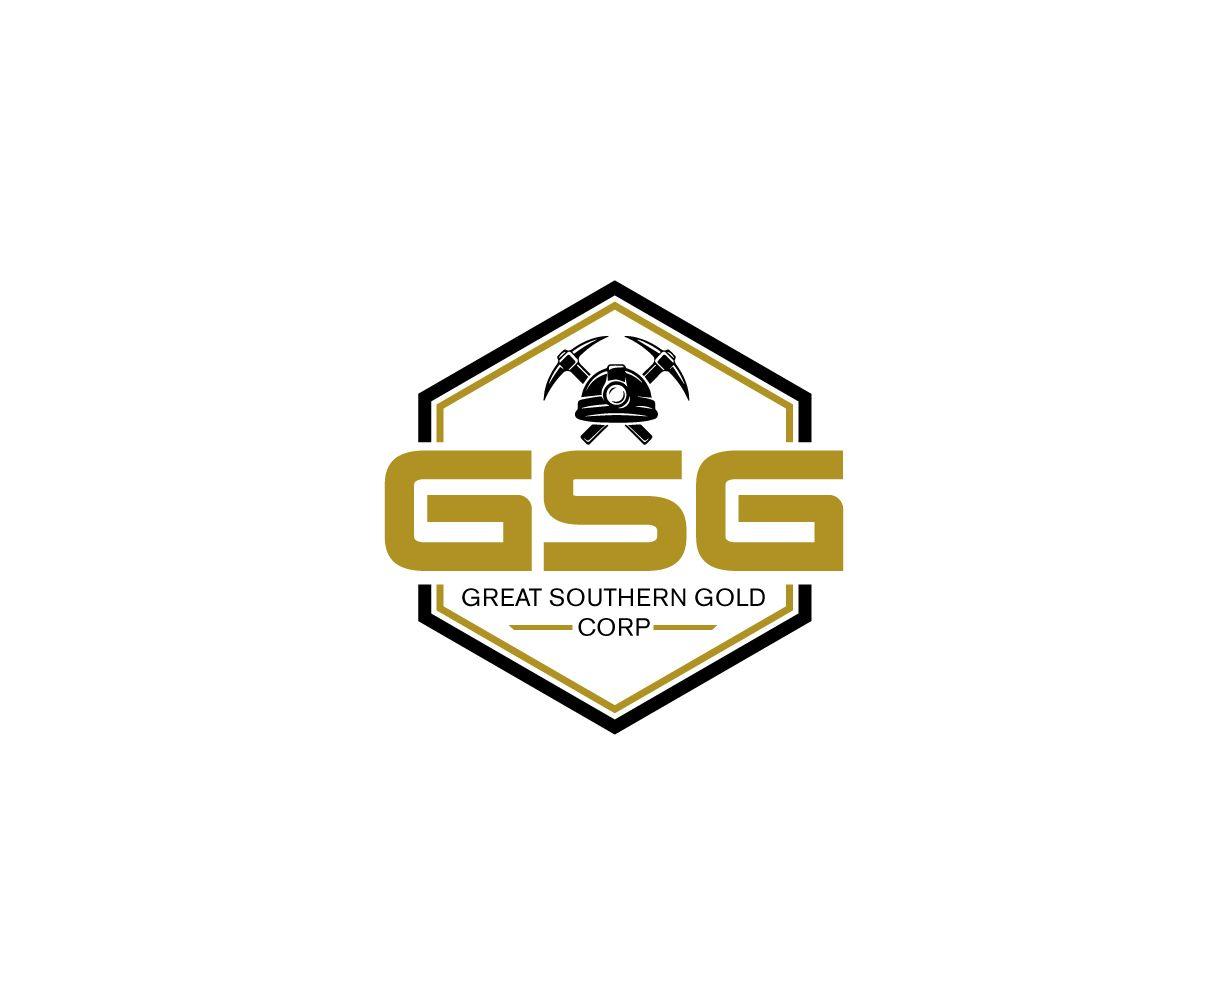 Gold Mining Logo - Professional, Conservative, Mining Logo Design for Either 